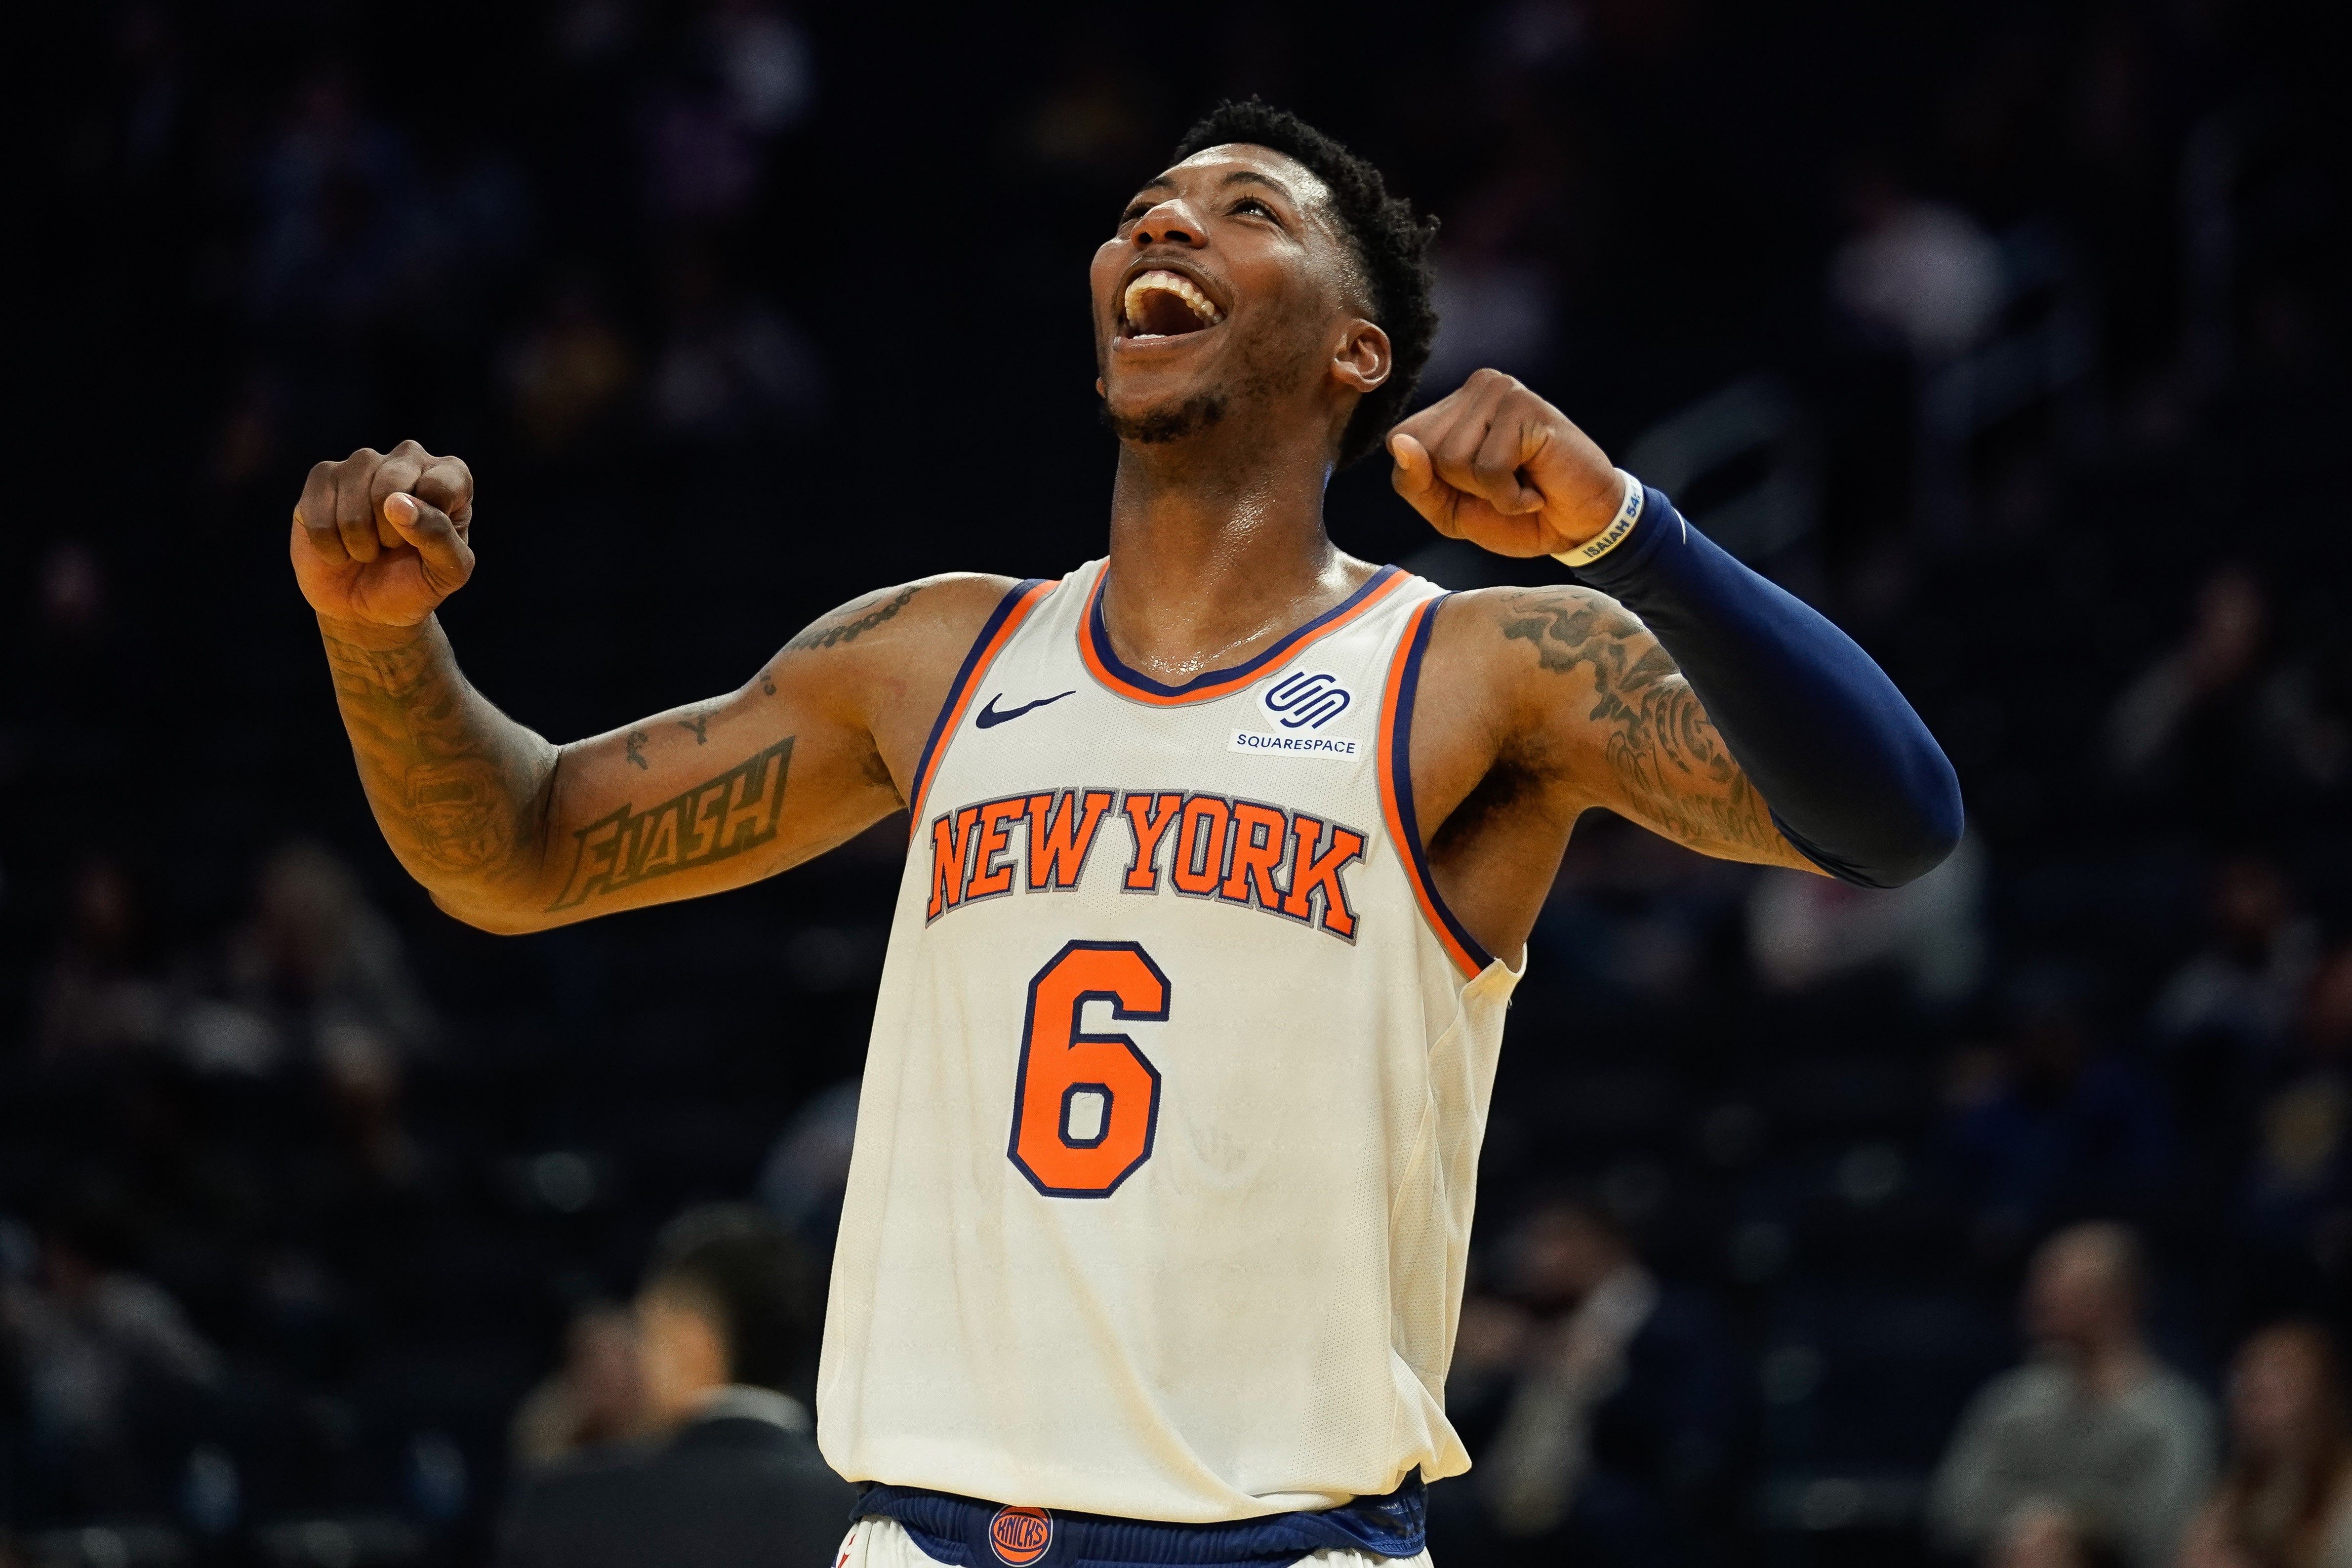 The New York Knicks 2019-20 has officially come to and end